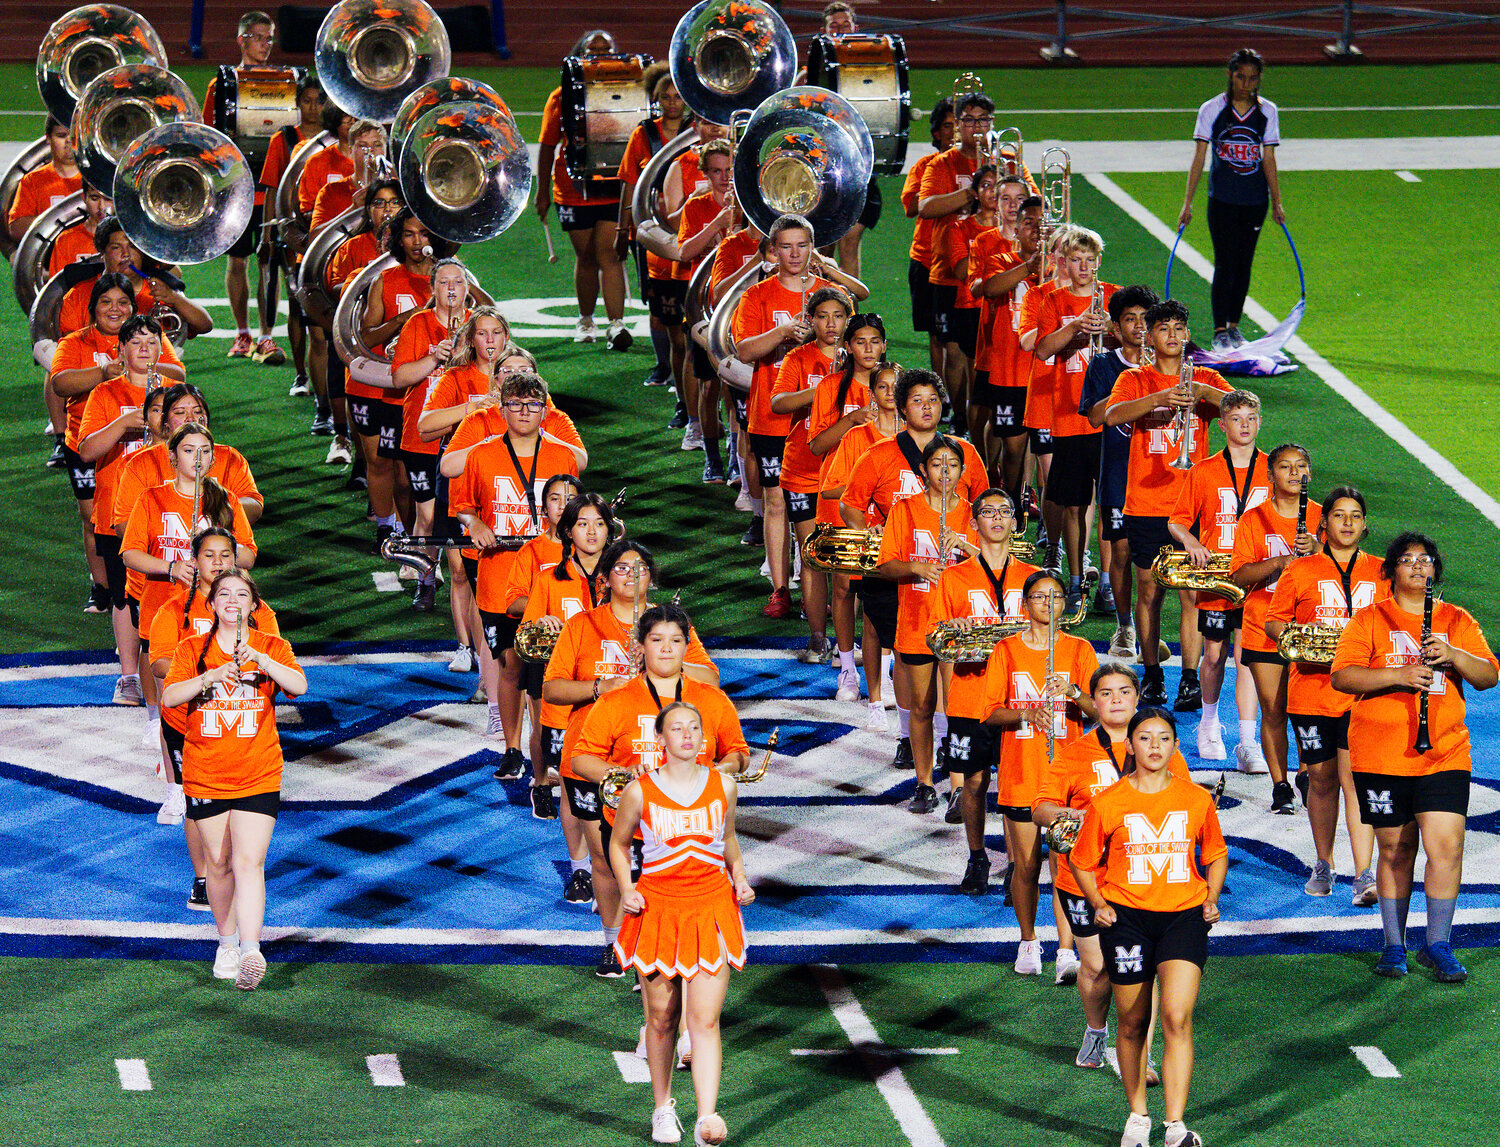 Mineola's Sound of the Swarm marching band performed its developing contest show for the Wesk Rusk crowd at half time. [catch all the action]